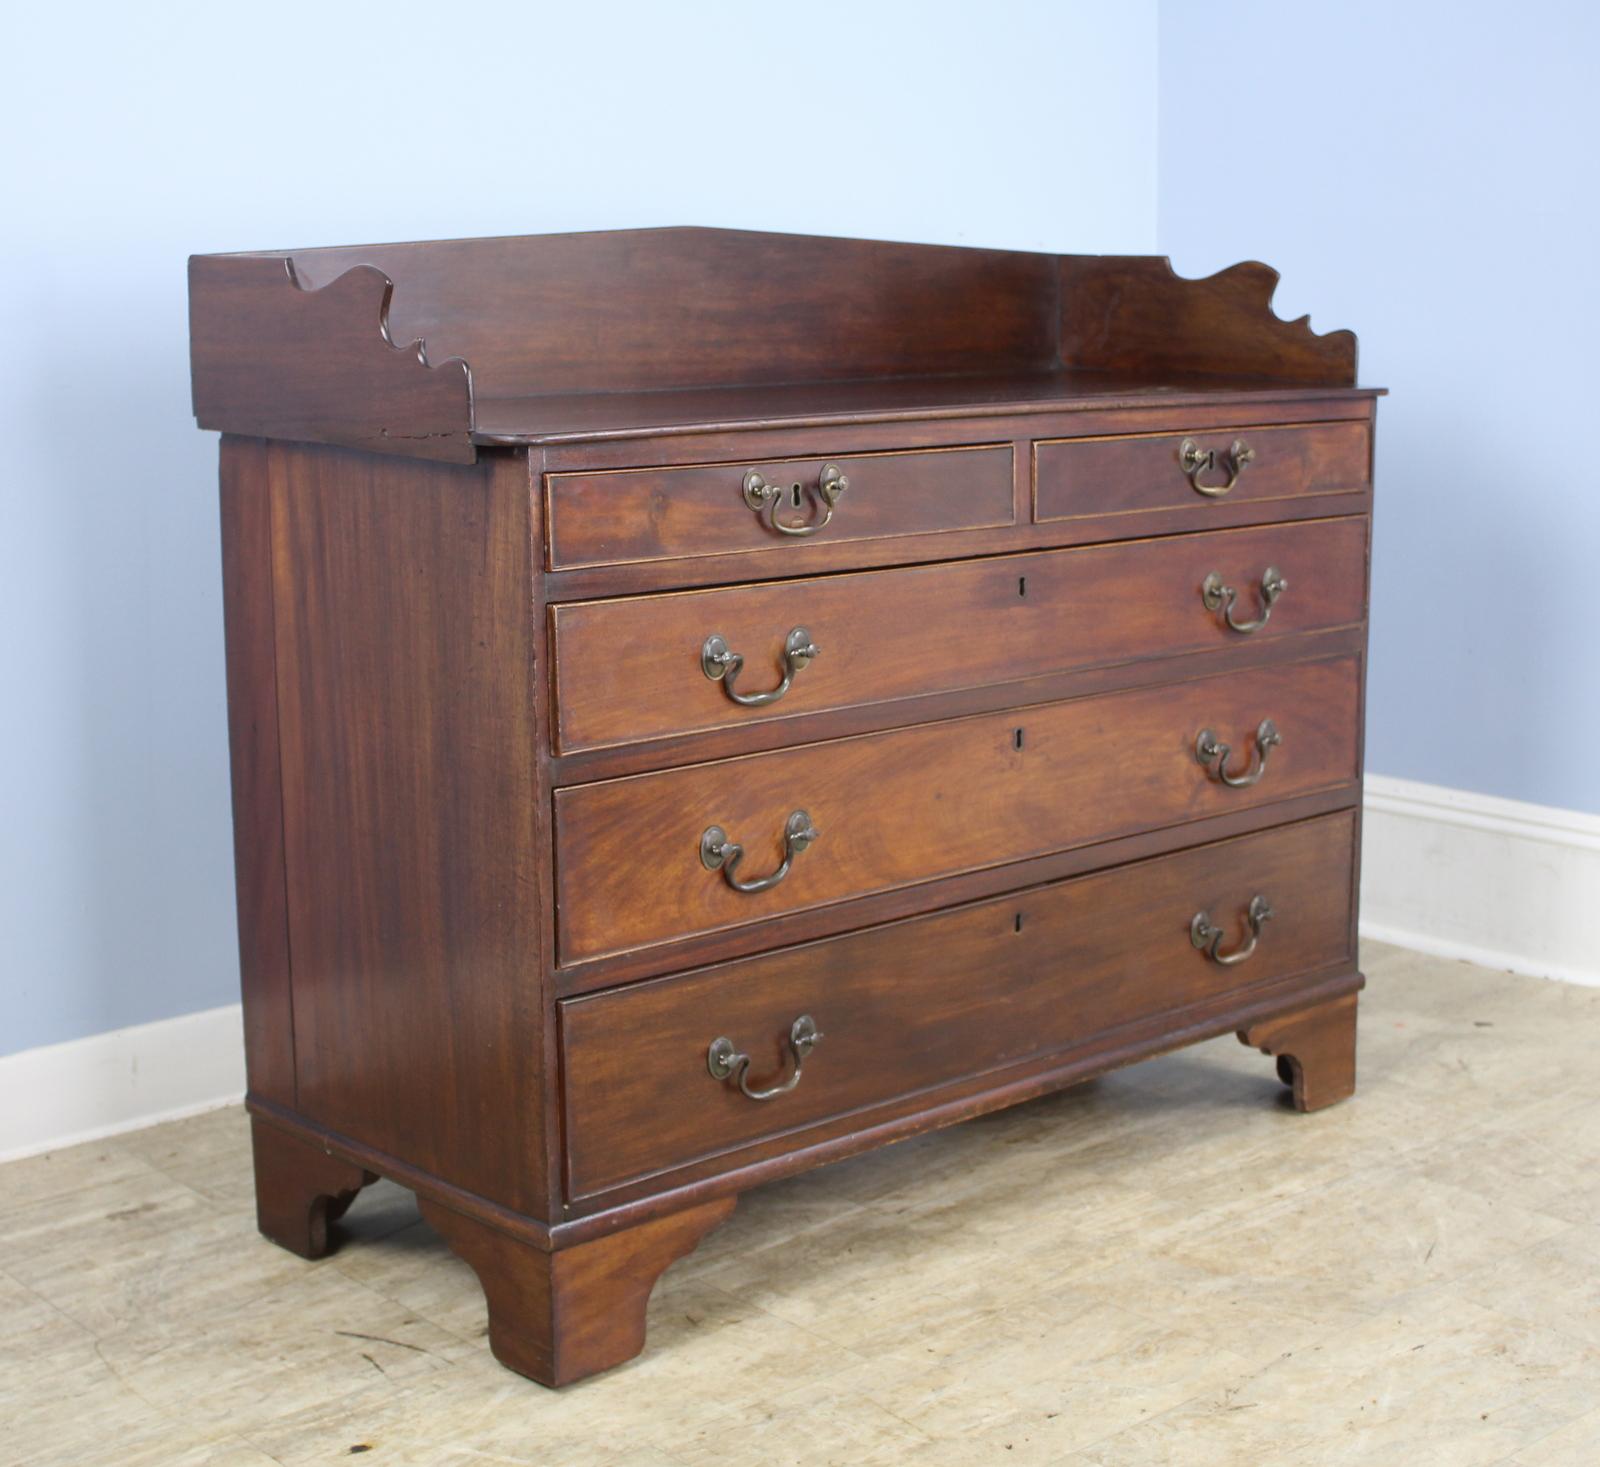 A charming Irish chest with whimsical galleried back. Originally intended to store silver and linens, this piece would be good in the bedroom or anywhere attractive storage is needed. Original hardware. Measurement below is for the total height. The